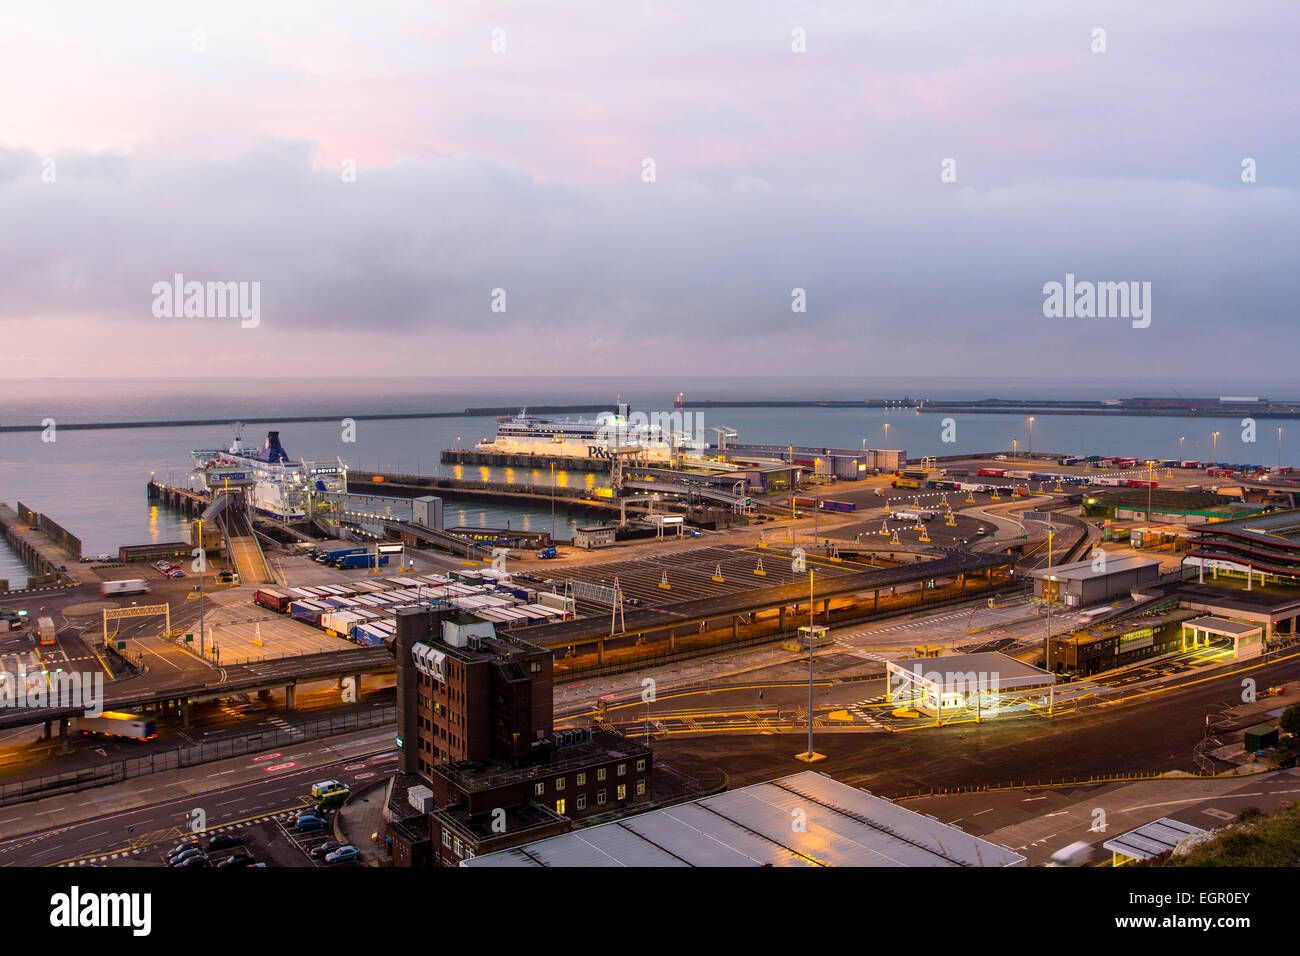 High angle view from the clifftop of the ferry terminal in the dawn at the English Channel port of Dover. 2 car ferries berthed at embarkation points. Stock Photo